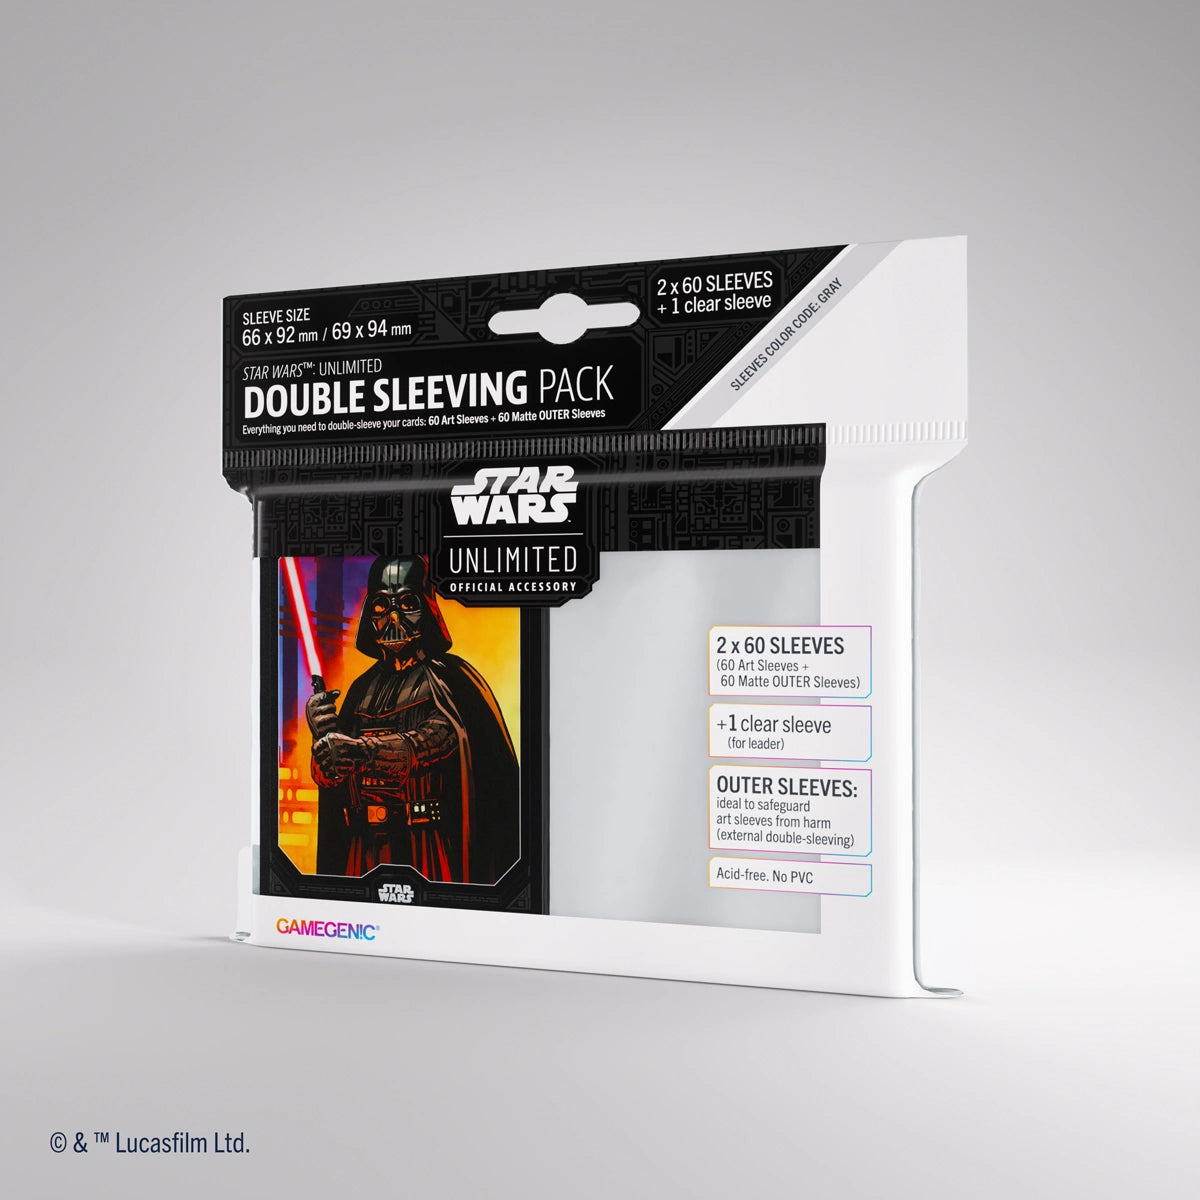 GAMEGENIC - STAR WARS: UNLIMITED ART SLEEVES DOUBLE SLEEVING PACK